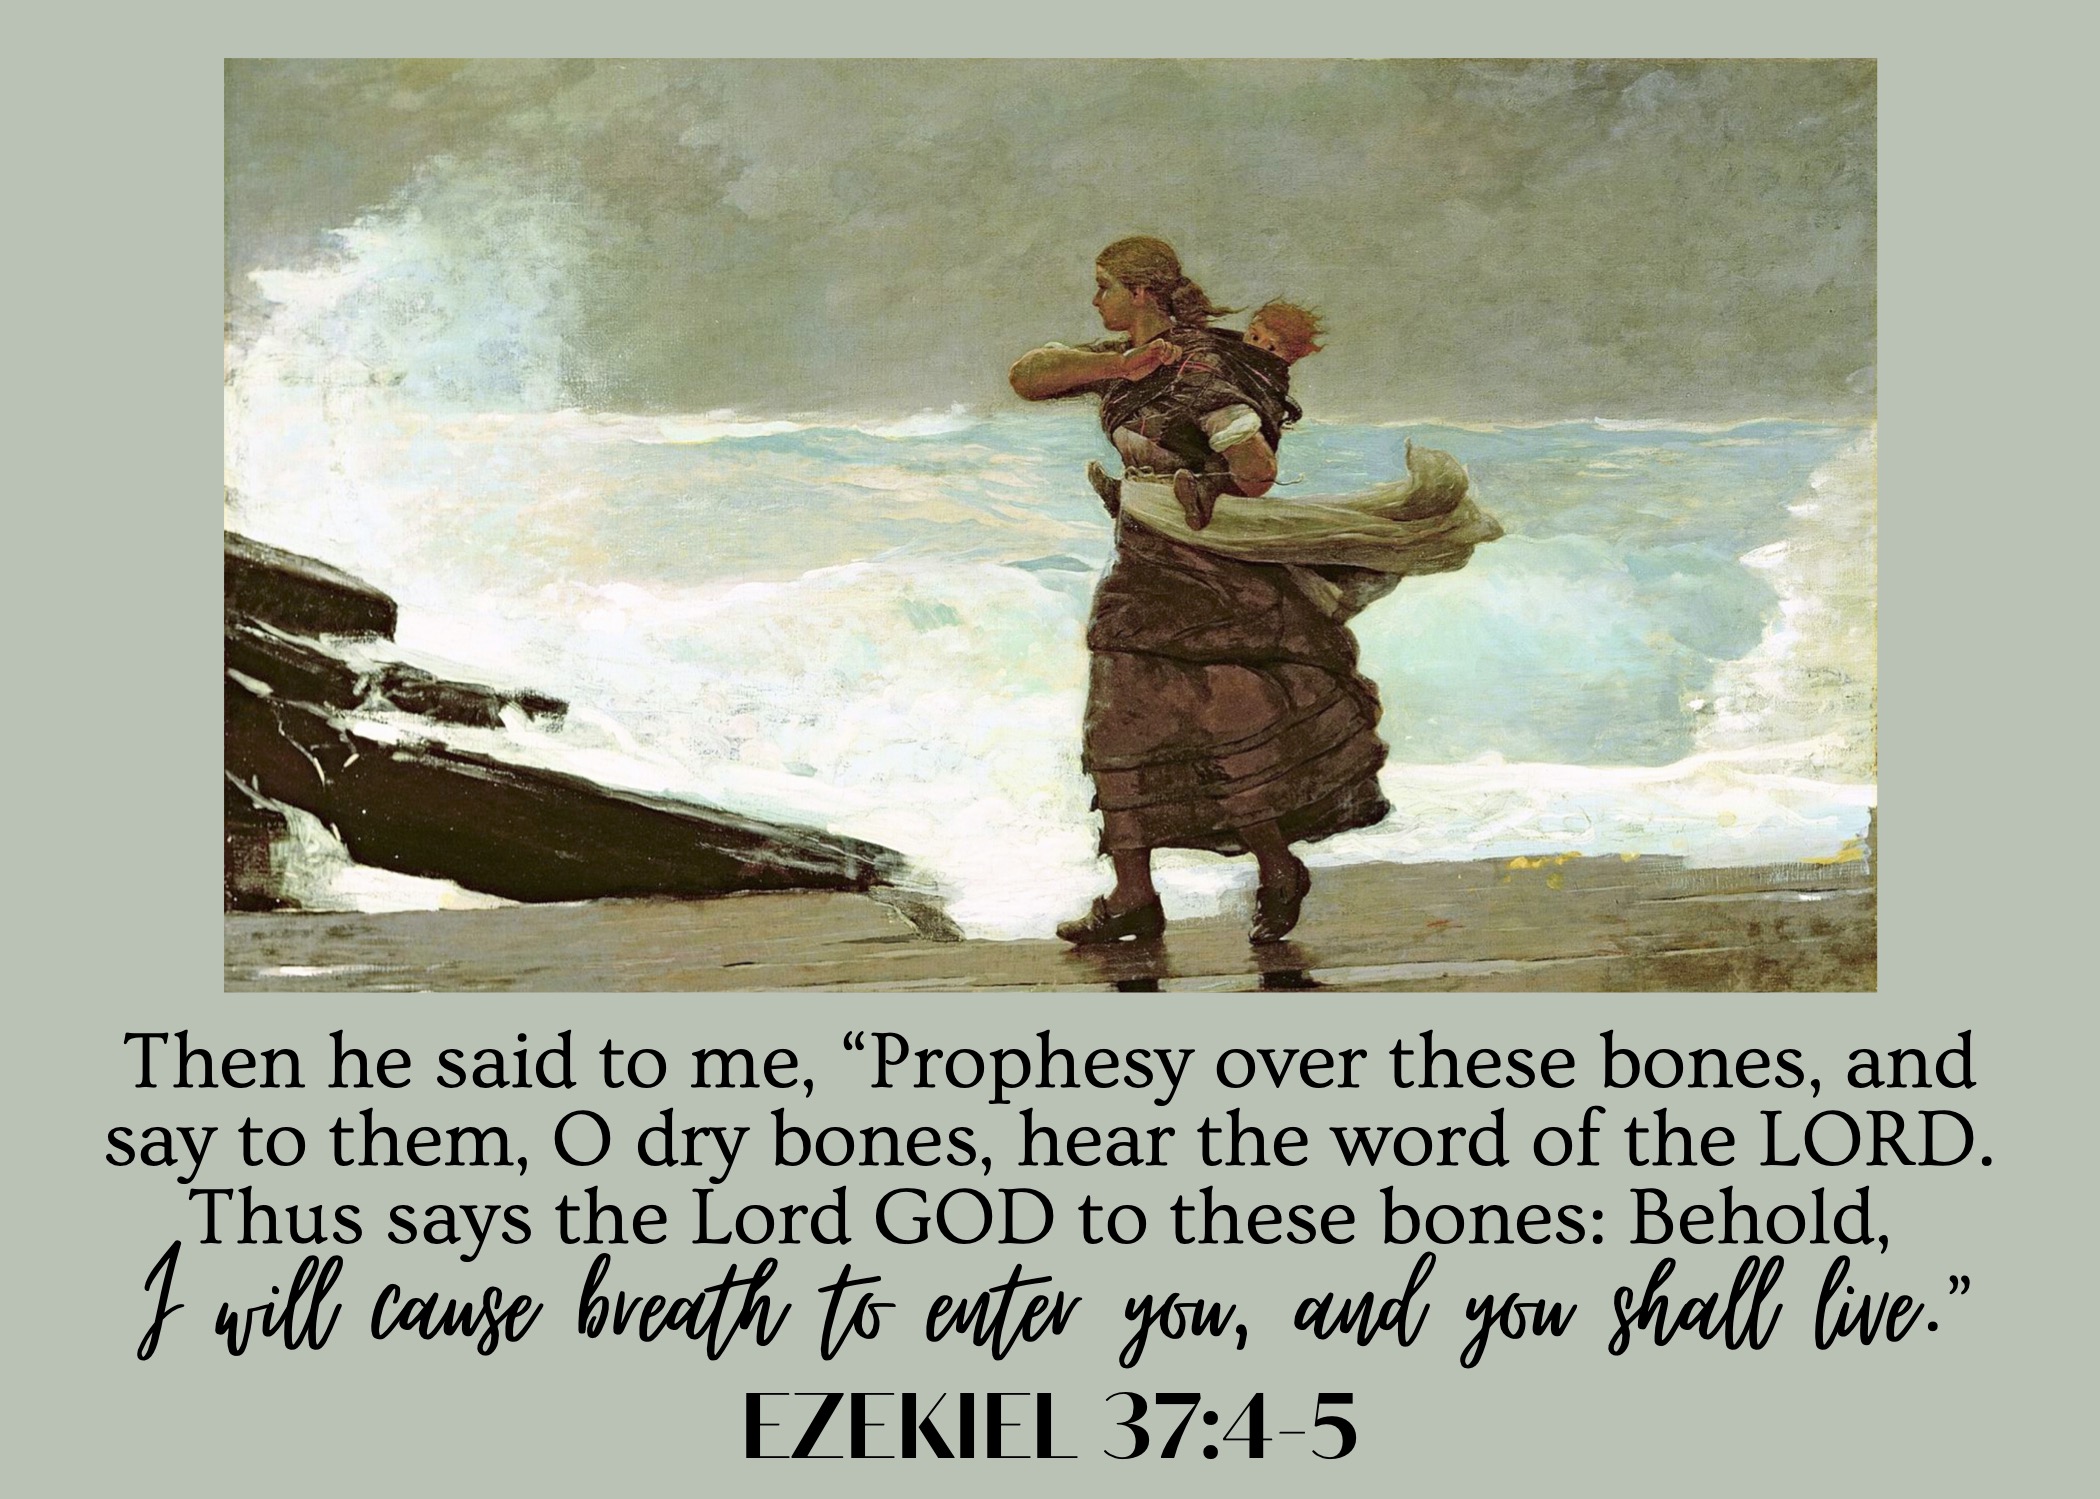 Then he said to me, "Prophesy over these bones, and say to them, O dry bones, hear the word of the LORD. Thus says the Lord GOD to these bones: Behold, I will cause breath to enter you, and you shall live." Ezekiel 37:4-5